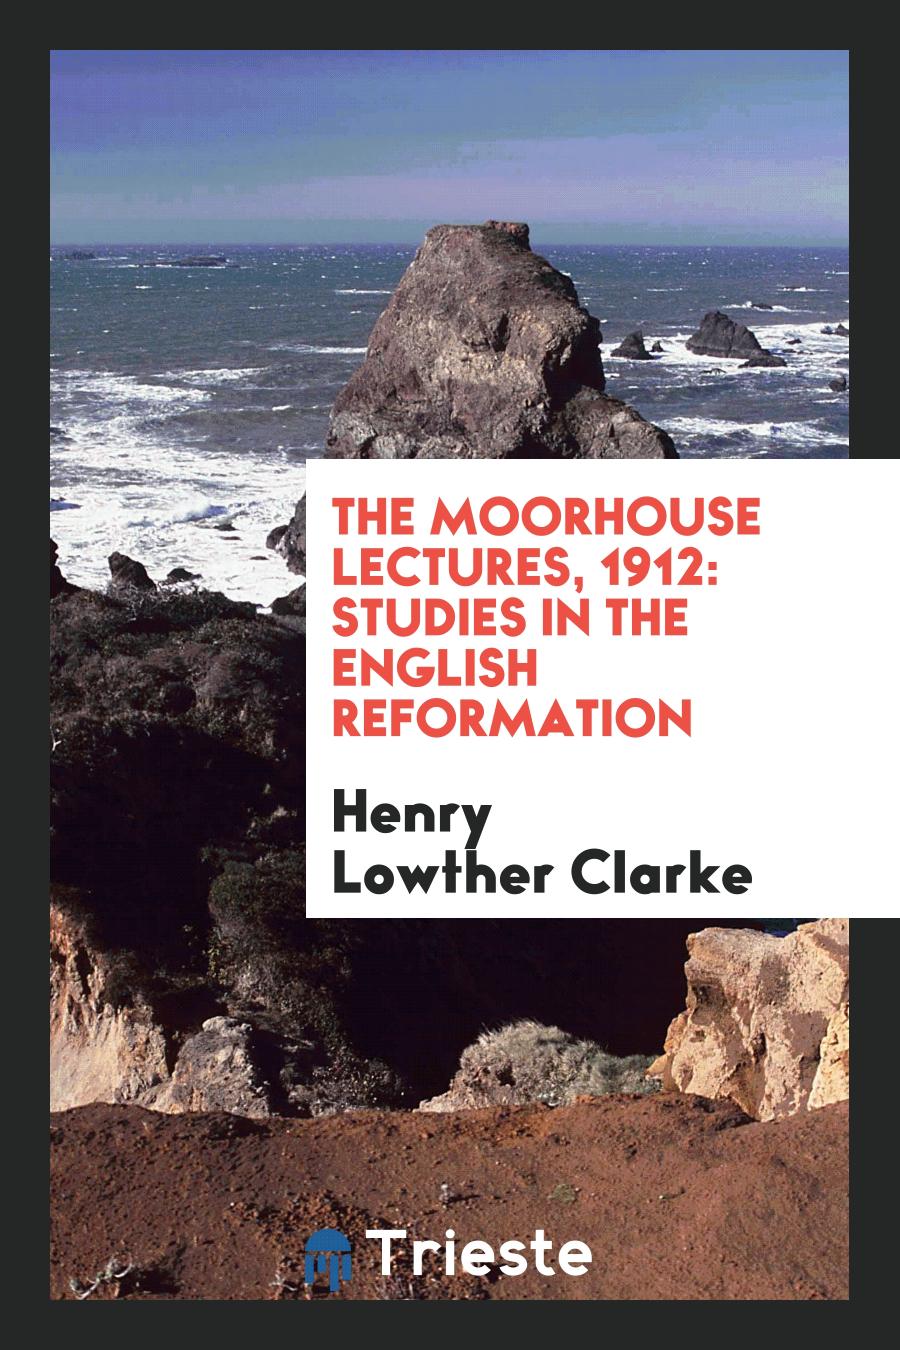 The Moorhouse Lectures, 1912: Studies in the English Reformation